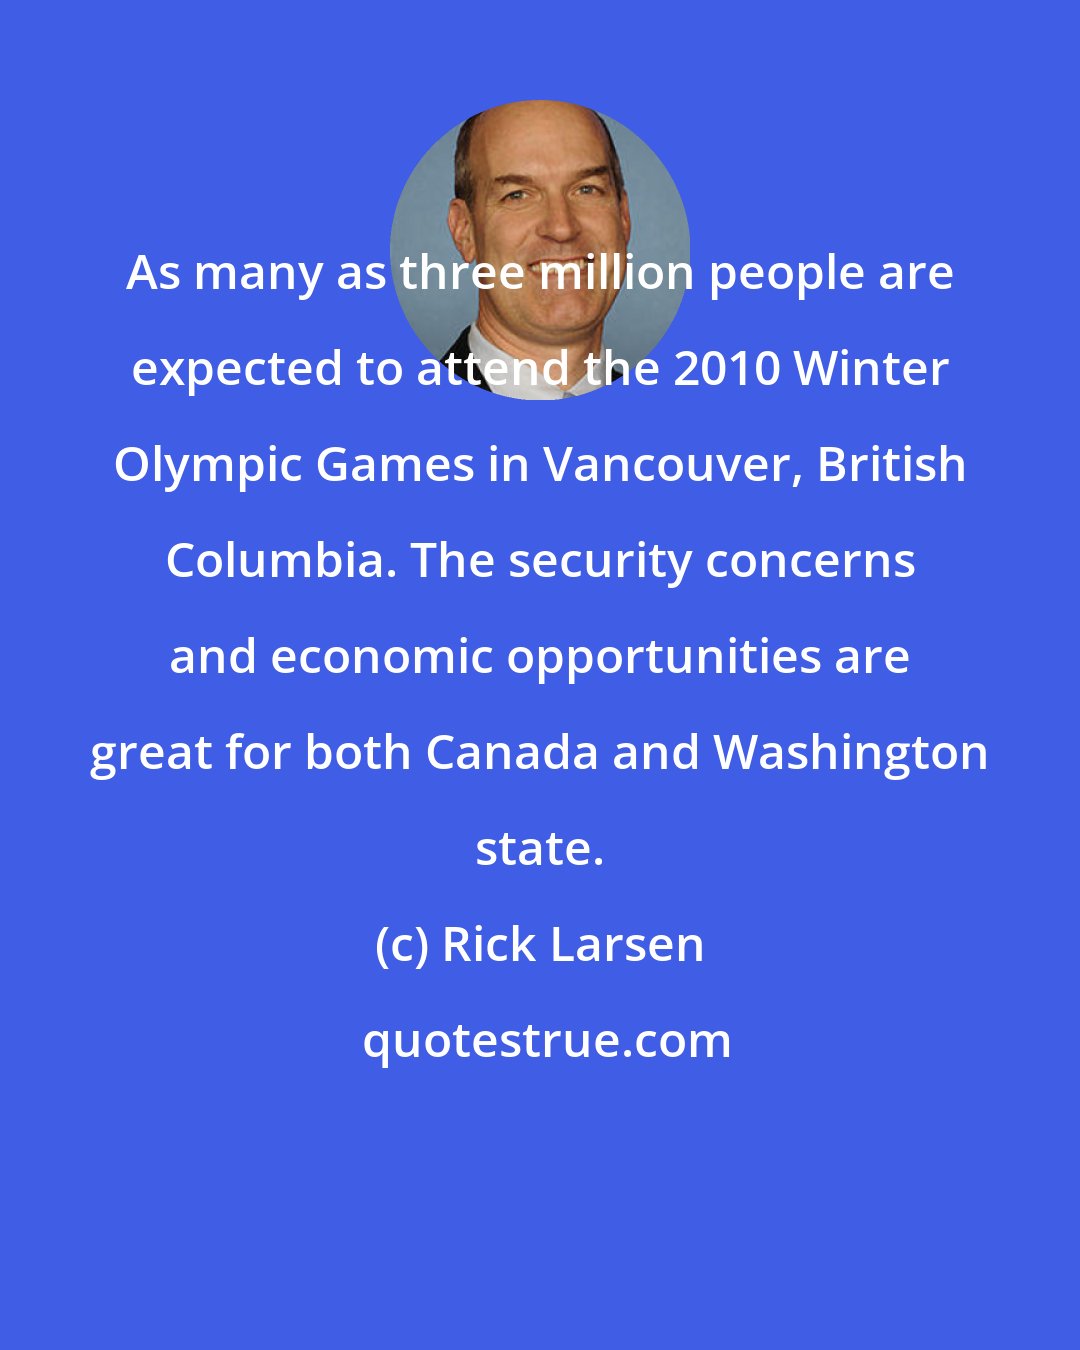 Rick Larsen: As many as three million people are expected to attend the 2010 Winter Olympic Games in Vancouver, British Columbia. The security concerns and economic opportunities are great for both Canada and Washington state.